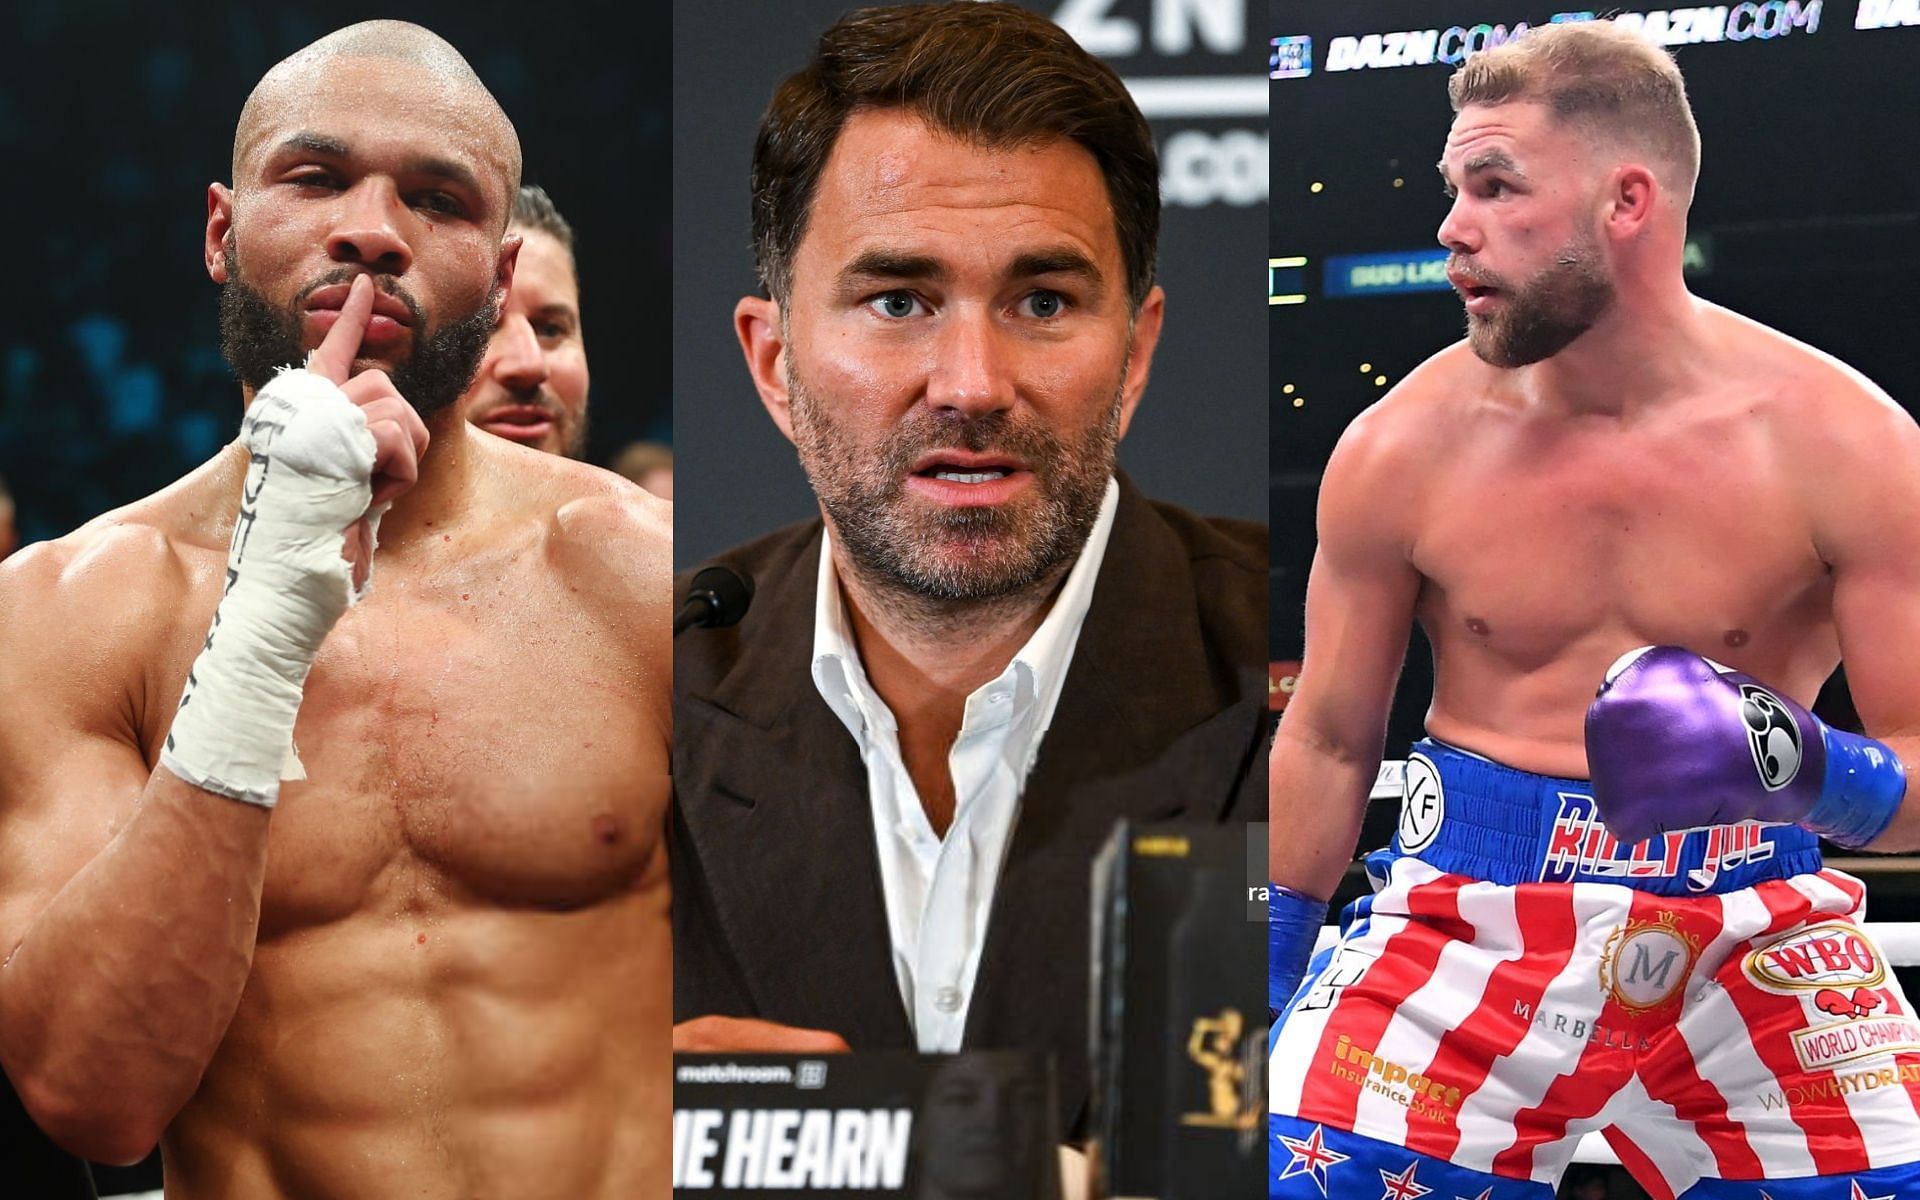 Chris Eubank Jr. (left), Eddie Hearn (middle) and Billy Joe Saunders (right) [Images Courtesy: @GettyImages]